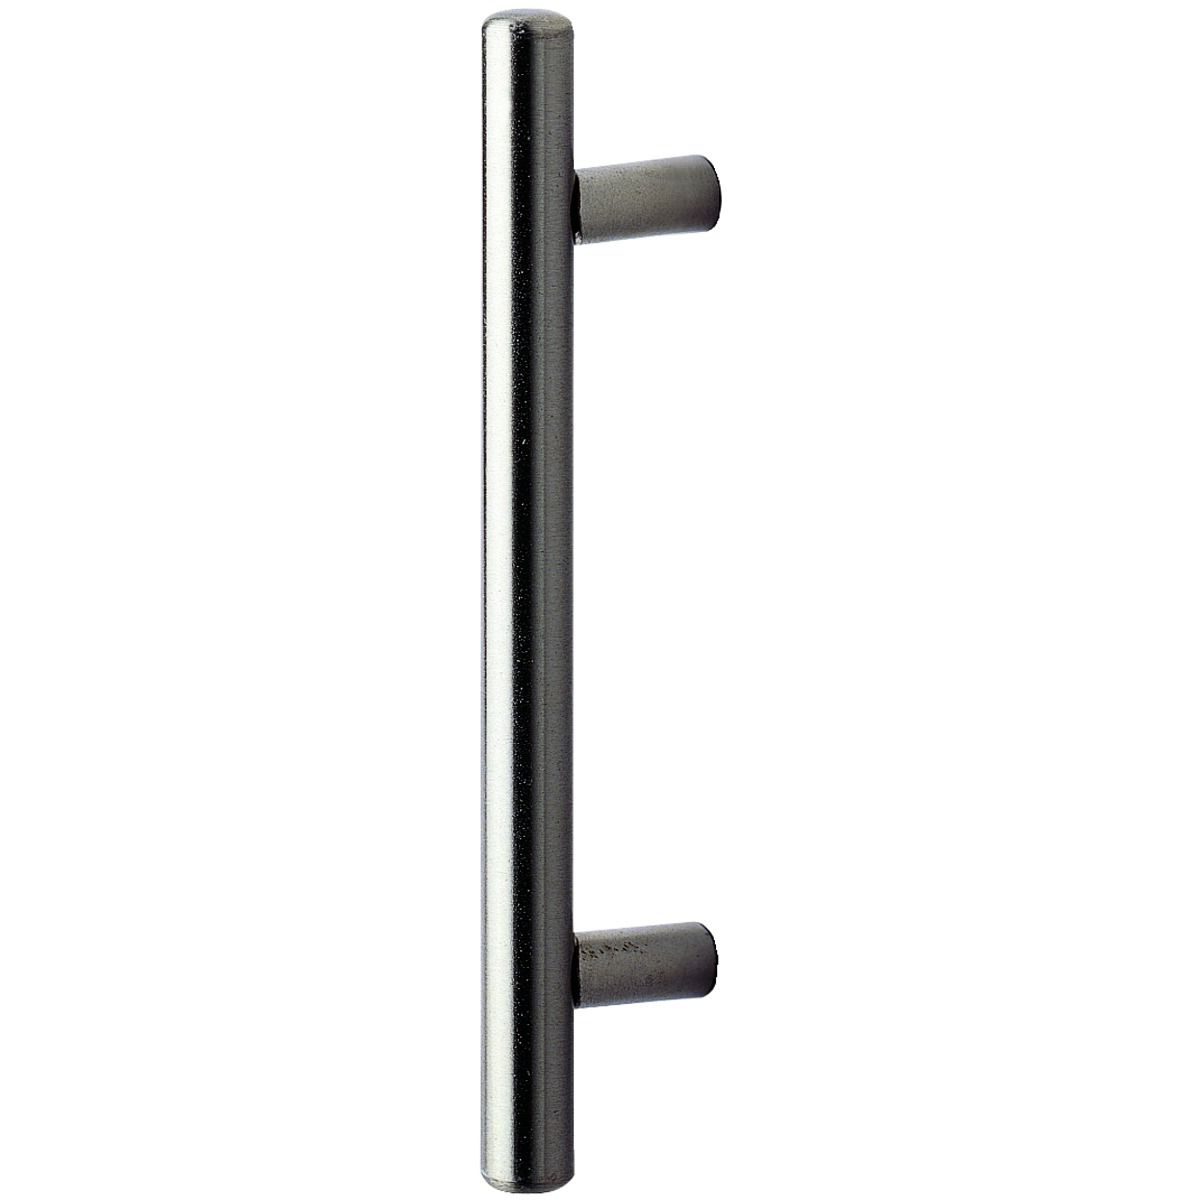 Image of Wickes Stainless Steel Satin Nickel Bar Handle for Bathrooms - 96mm